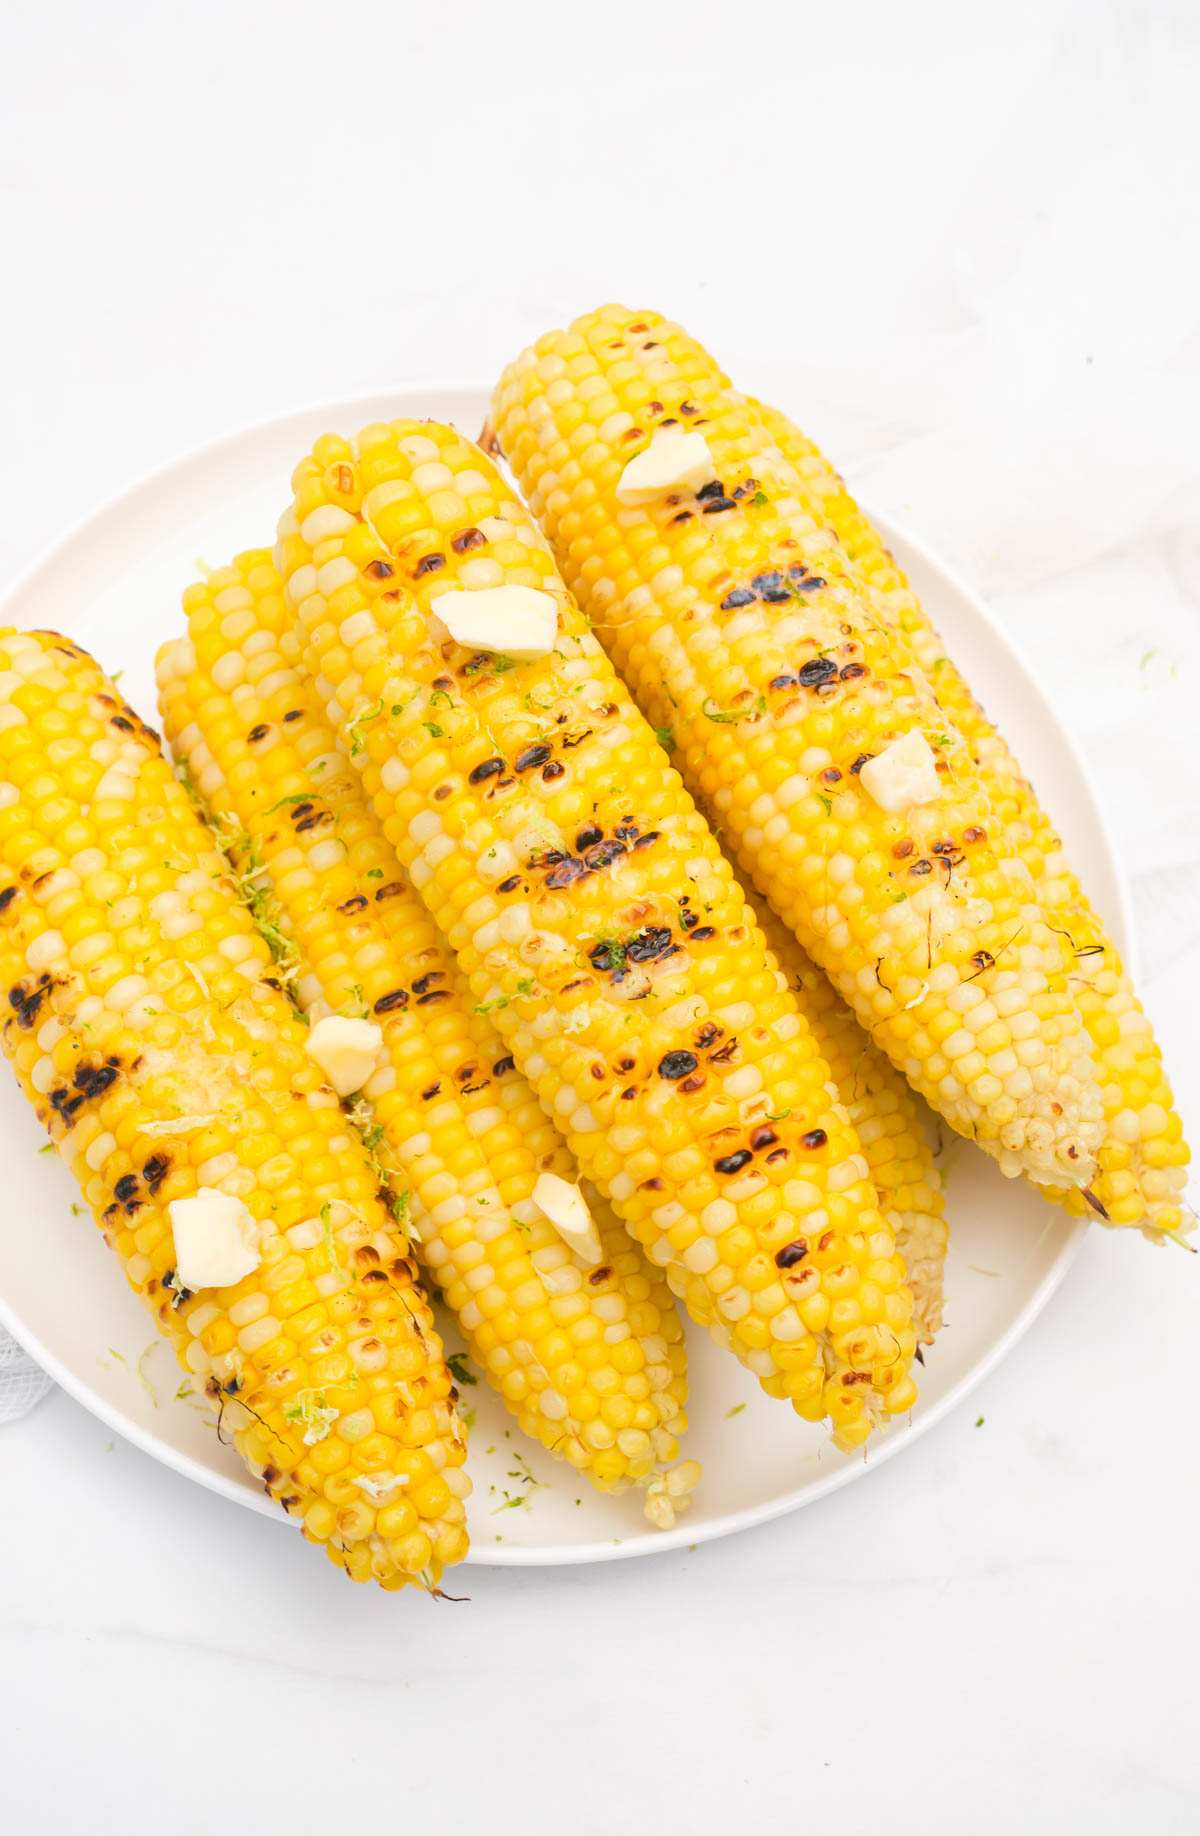 the finished corn seasoned with butter and fresh herbs.